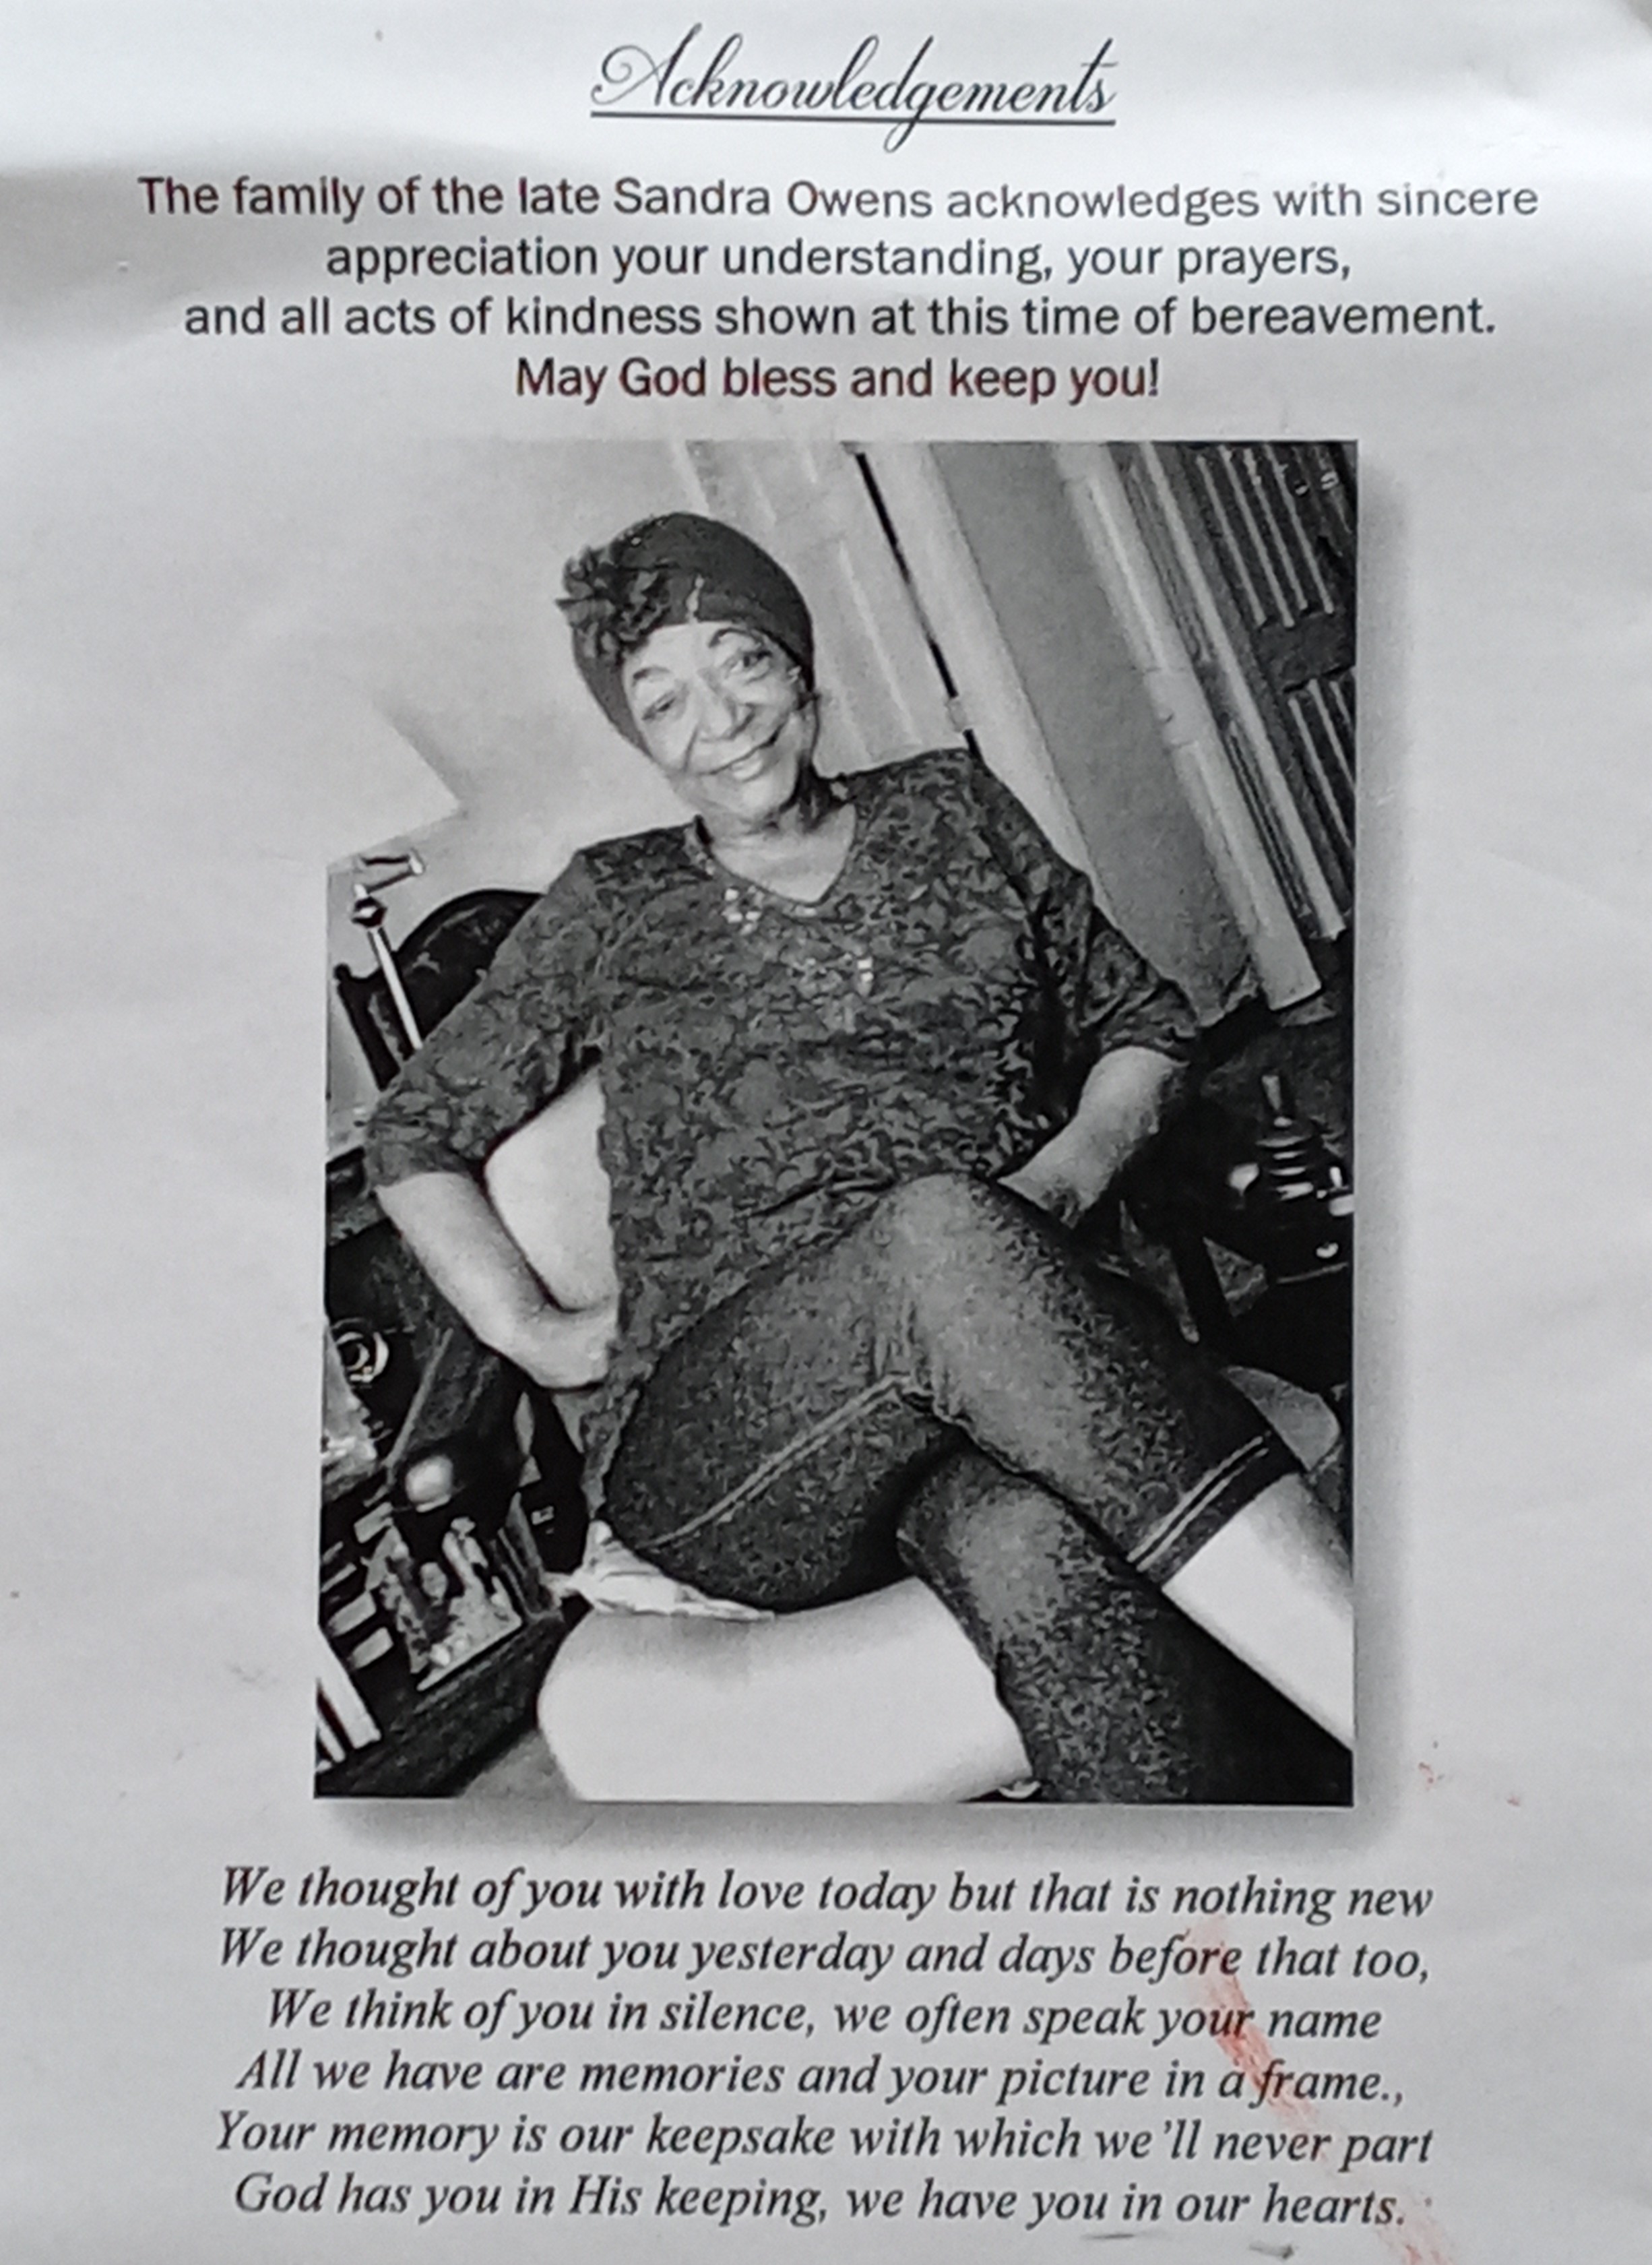 On the back of the pamphlet. Image description: Sandra Owens strikes a sassy attitude pose with her smile and arms on her cury waists. She is sitting on her chair. 

Notes: "We thought of you with love today but that is nothing new. We thought about you yesterday and days before that too, we think of you in silence, we often speak your name, all we have are memories and your picture in a frame, your memory is our keepsake with which we'll never part. God has you in His keeping, we have you in our hearts."